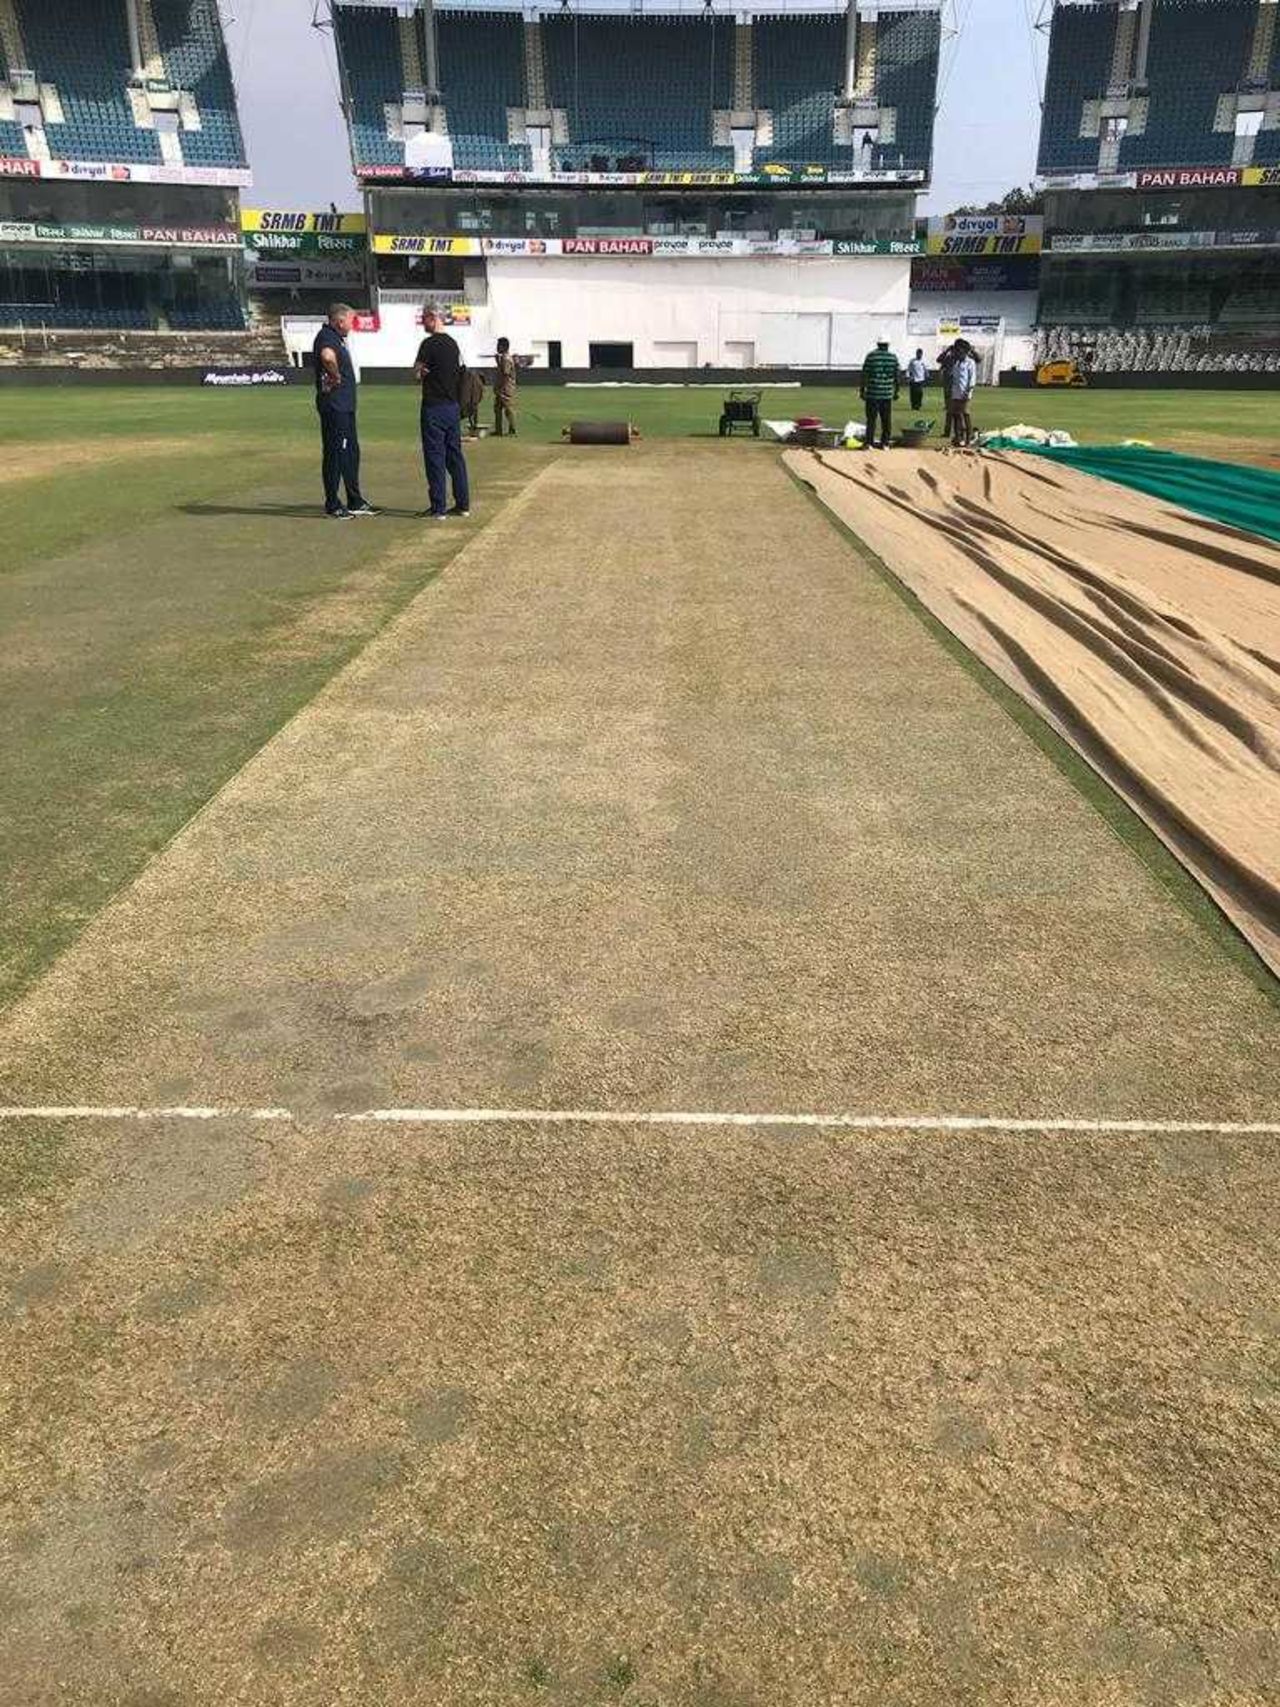 The pitch for the second India vs England Test in Chennai, Chennai, February 11, 2021